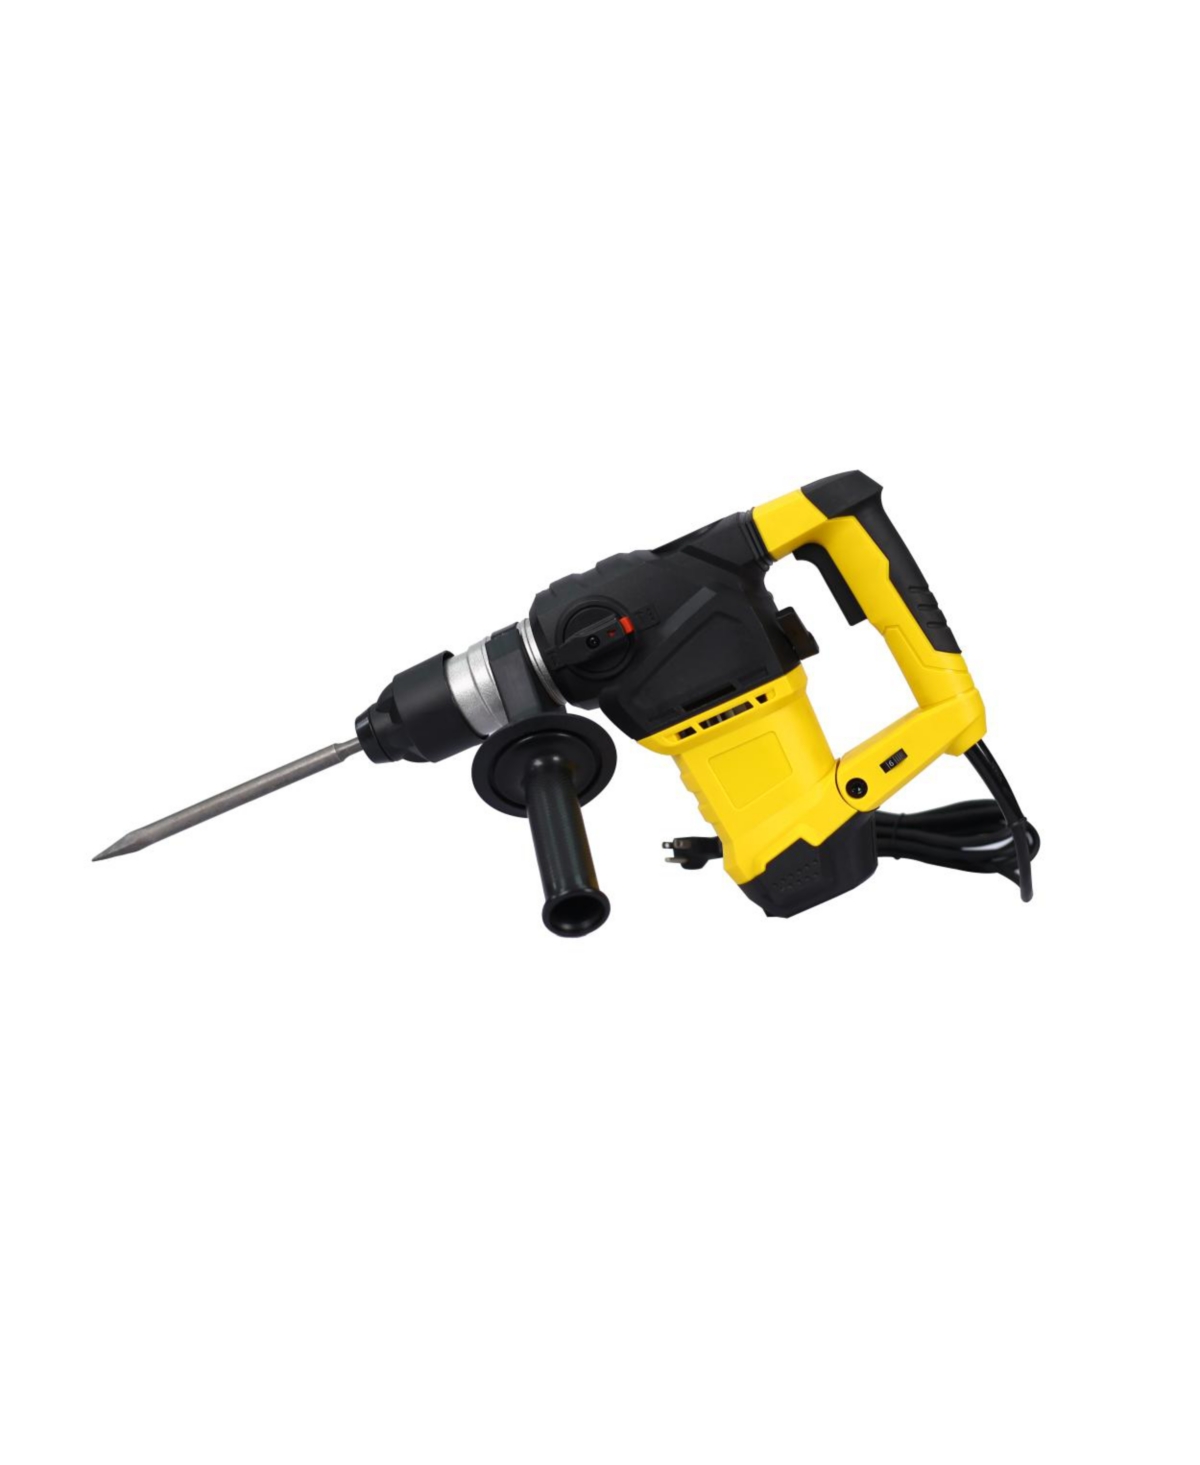 Professioinal Quality 1-1/4" Sds-Plus Heavy Duty Rotary Hammer Drill 13 Amp - Bright Yellow